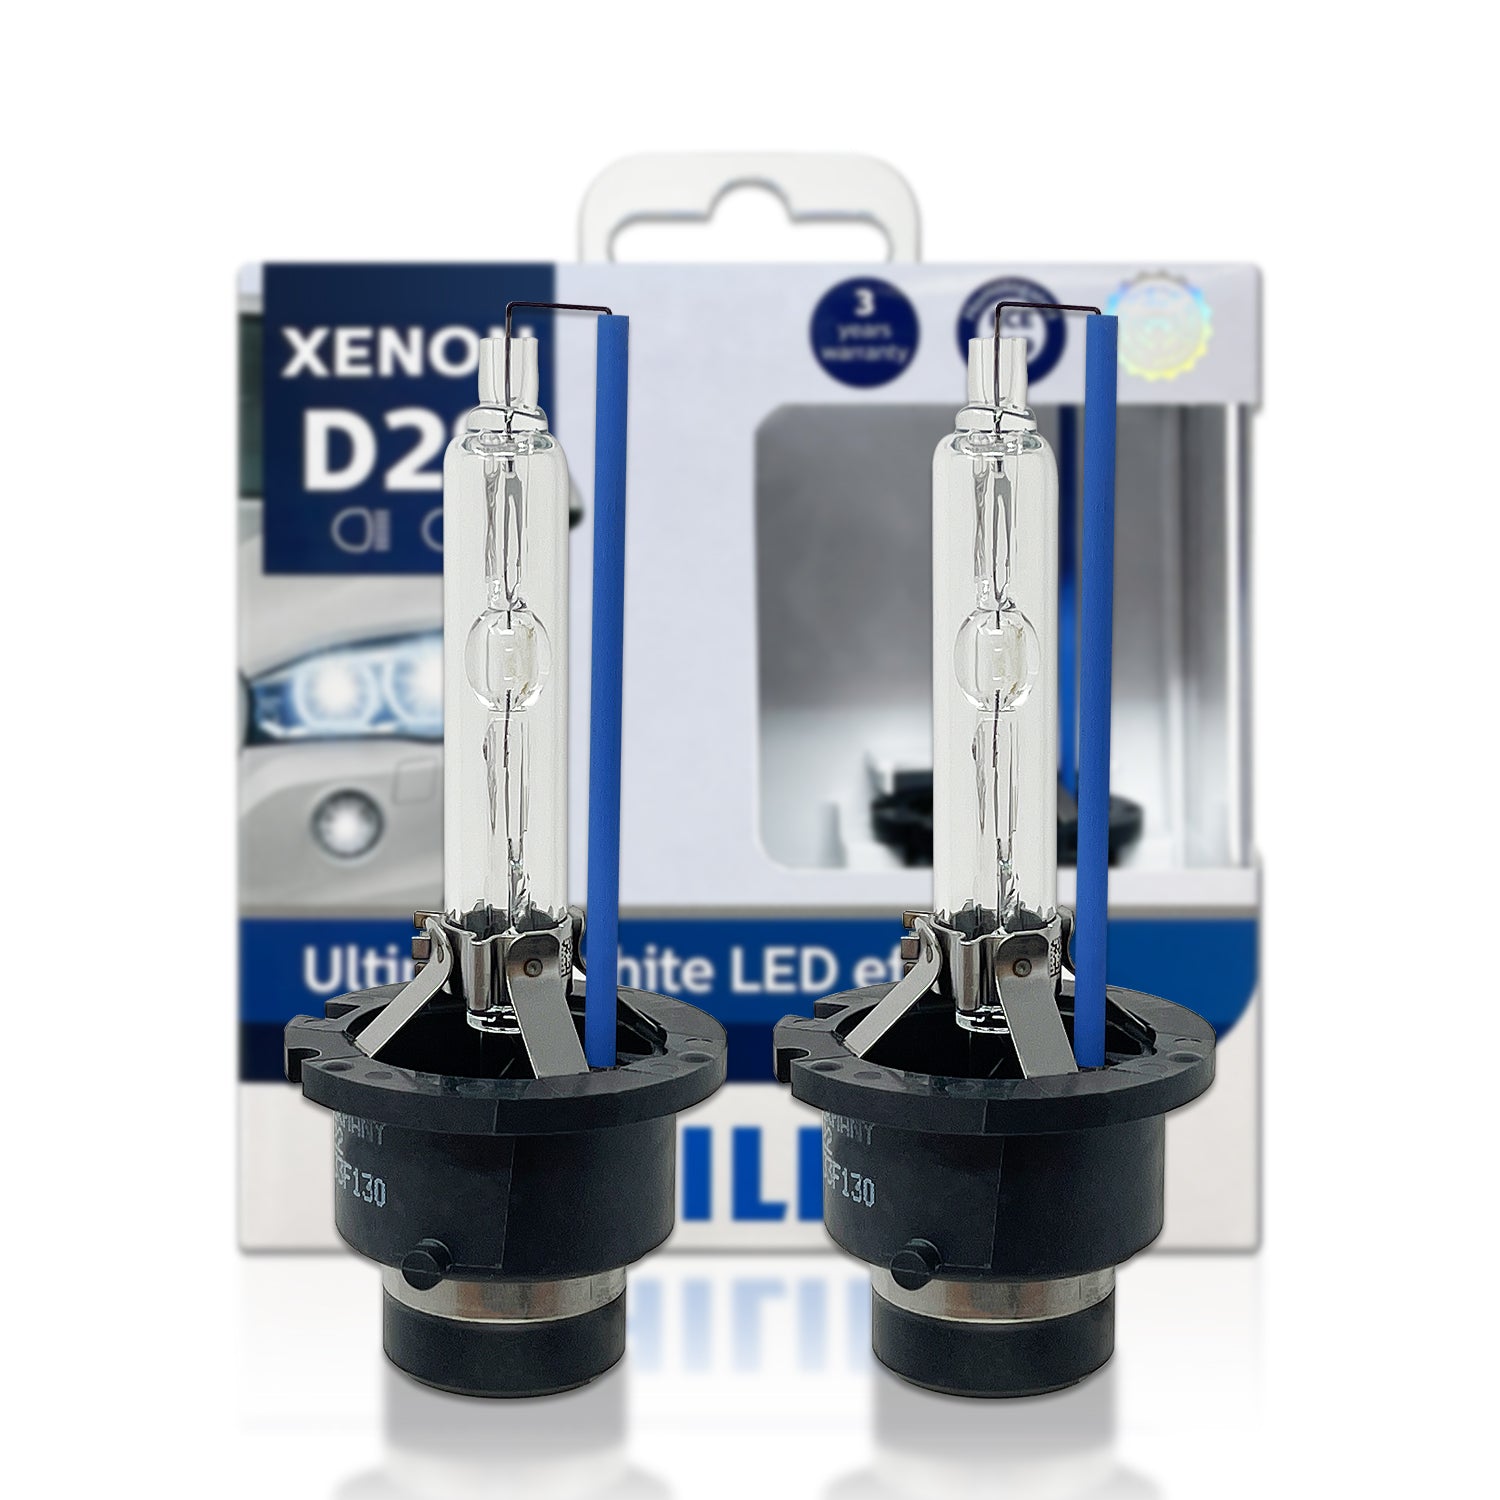 D3S Xenon Hid Headlight Bulbs, 6000K Pure White, 35W, OEM Quality Hid  Headlights, 66340/42403/42302 Hid Replacement Bulbs, Pack Of Two